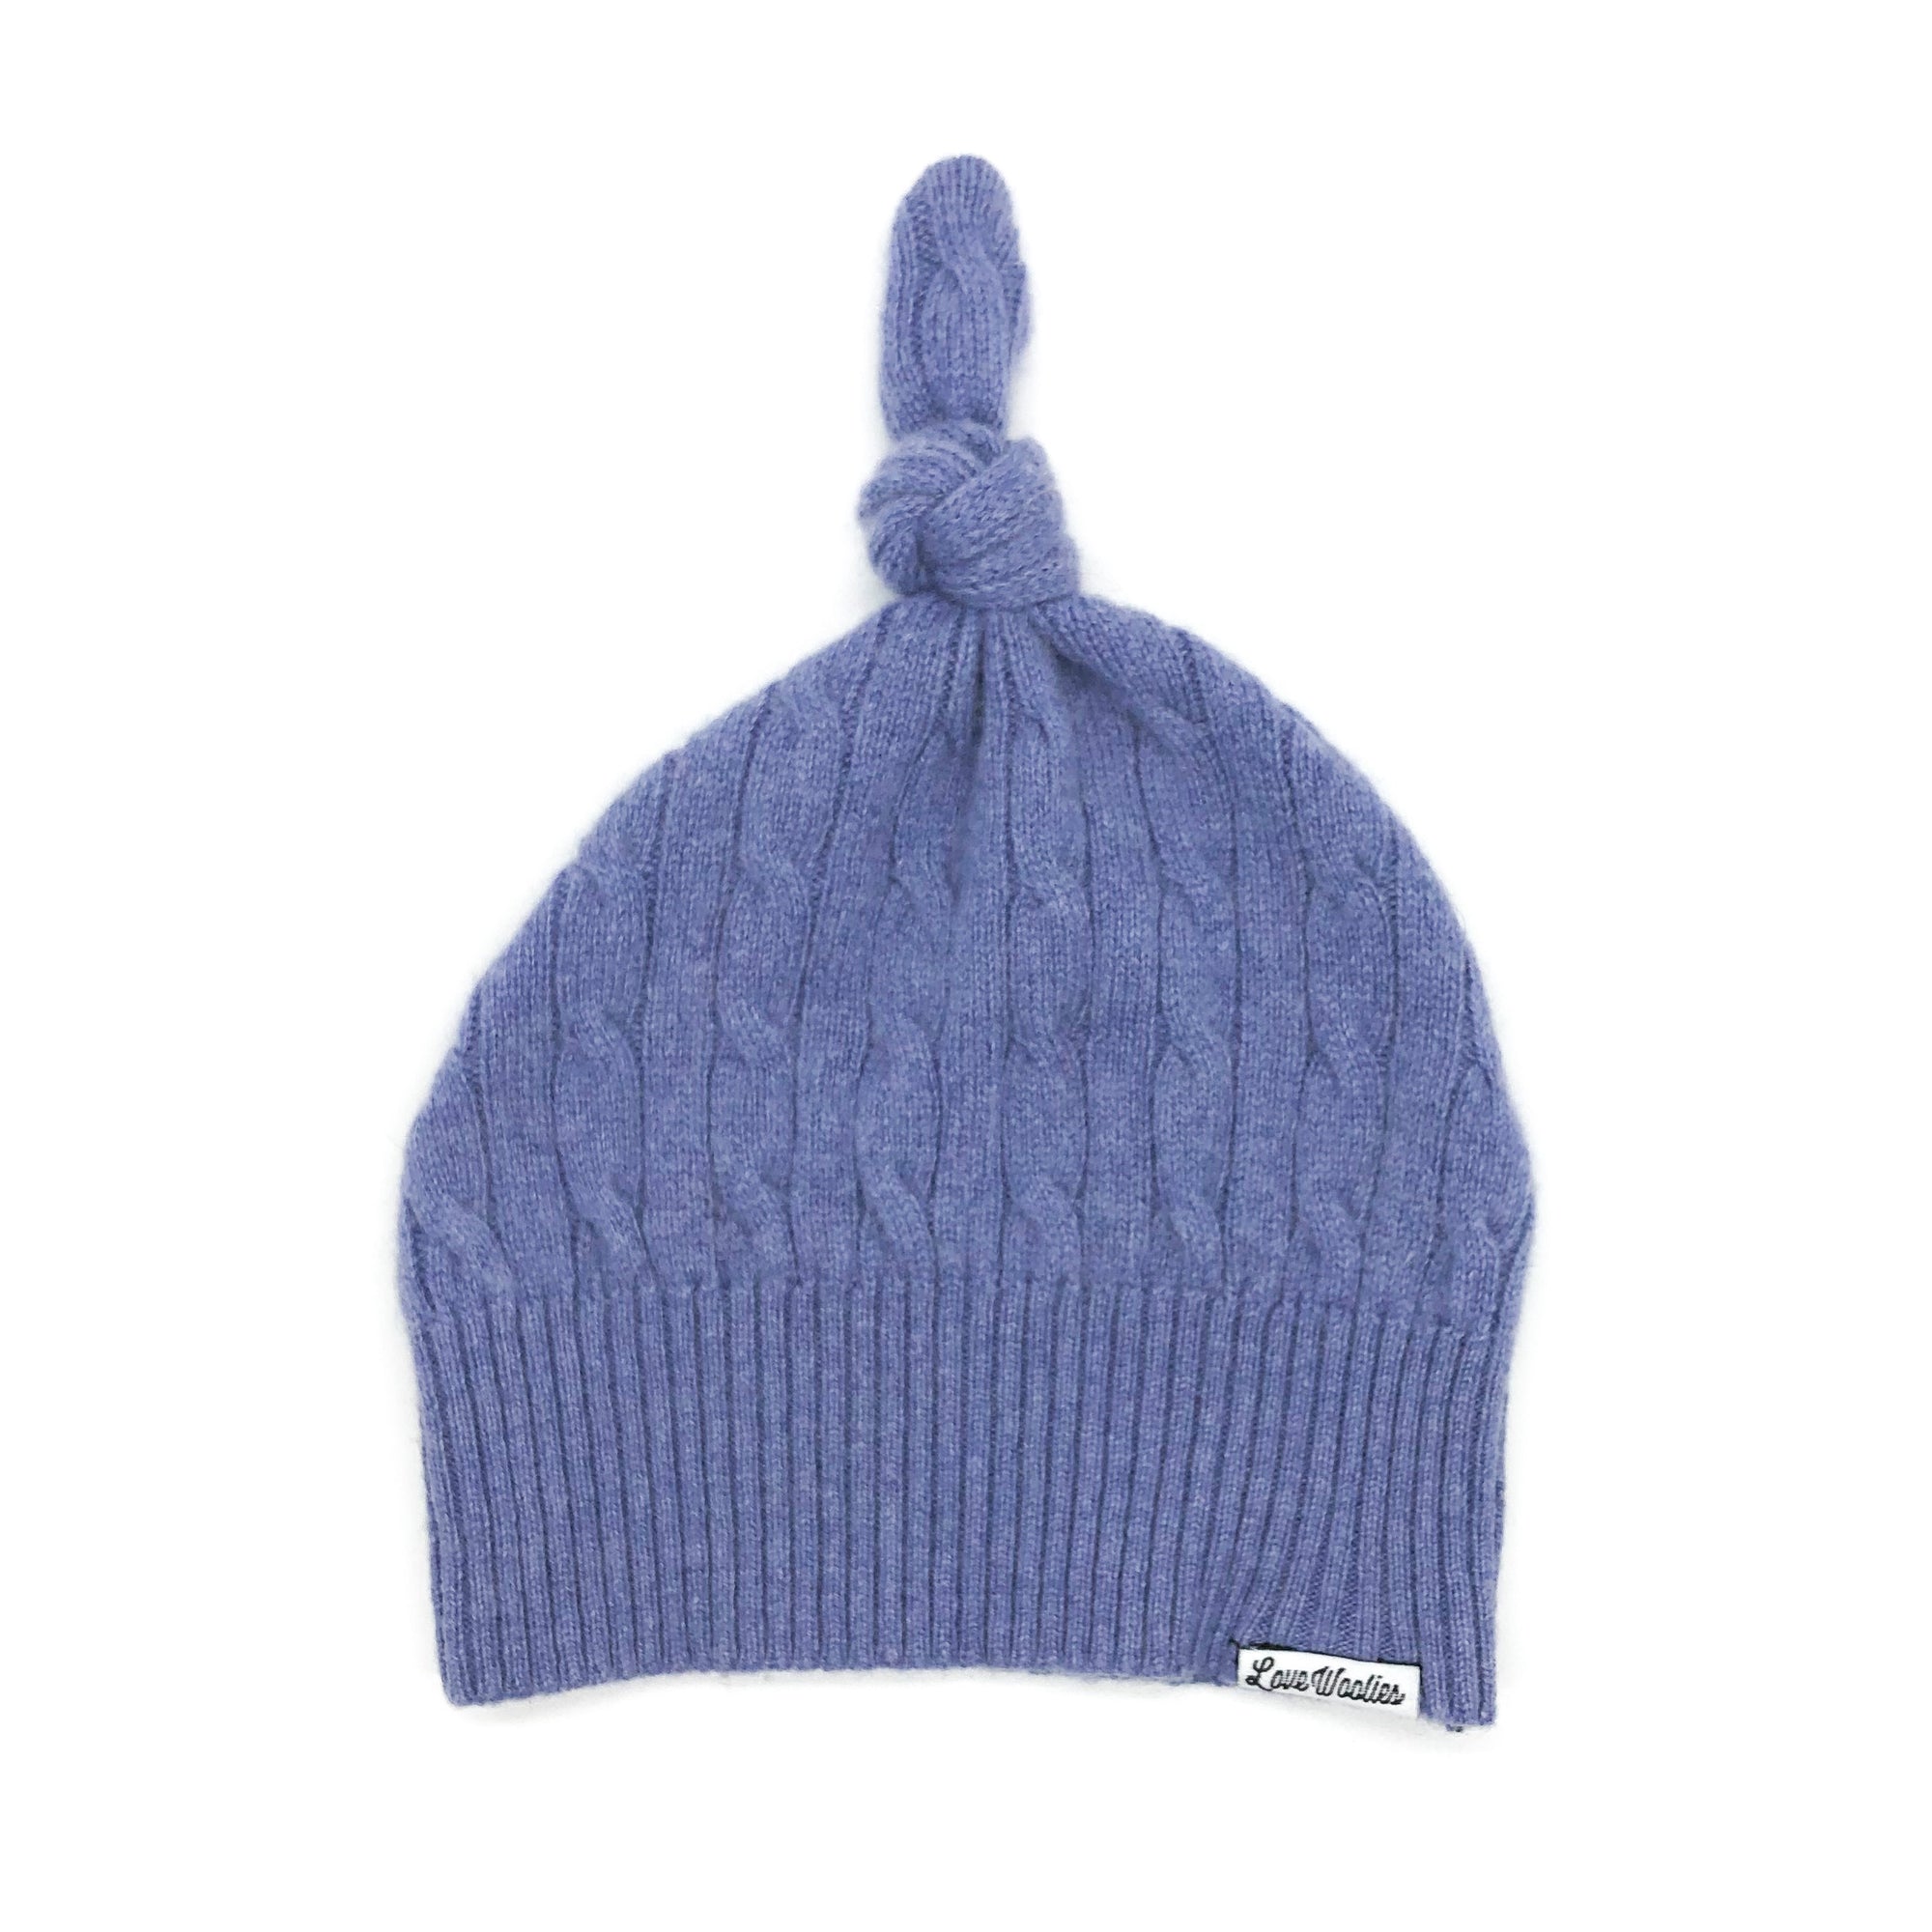 Cashmere Baby Beanie | Dark Sky Blue Cable Knit - Love Woolies